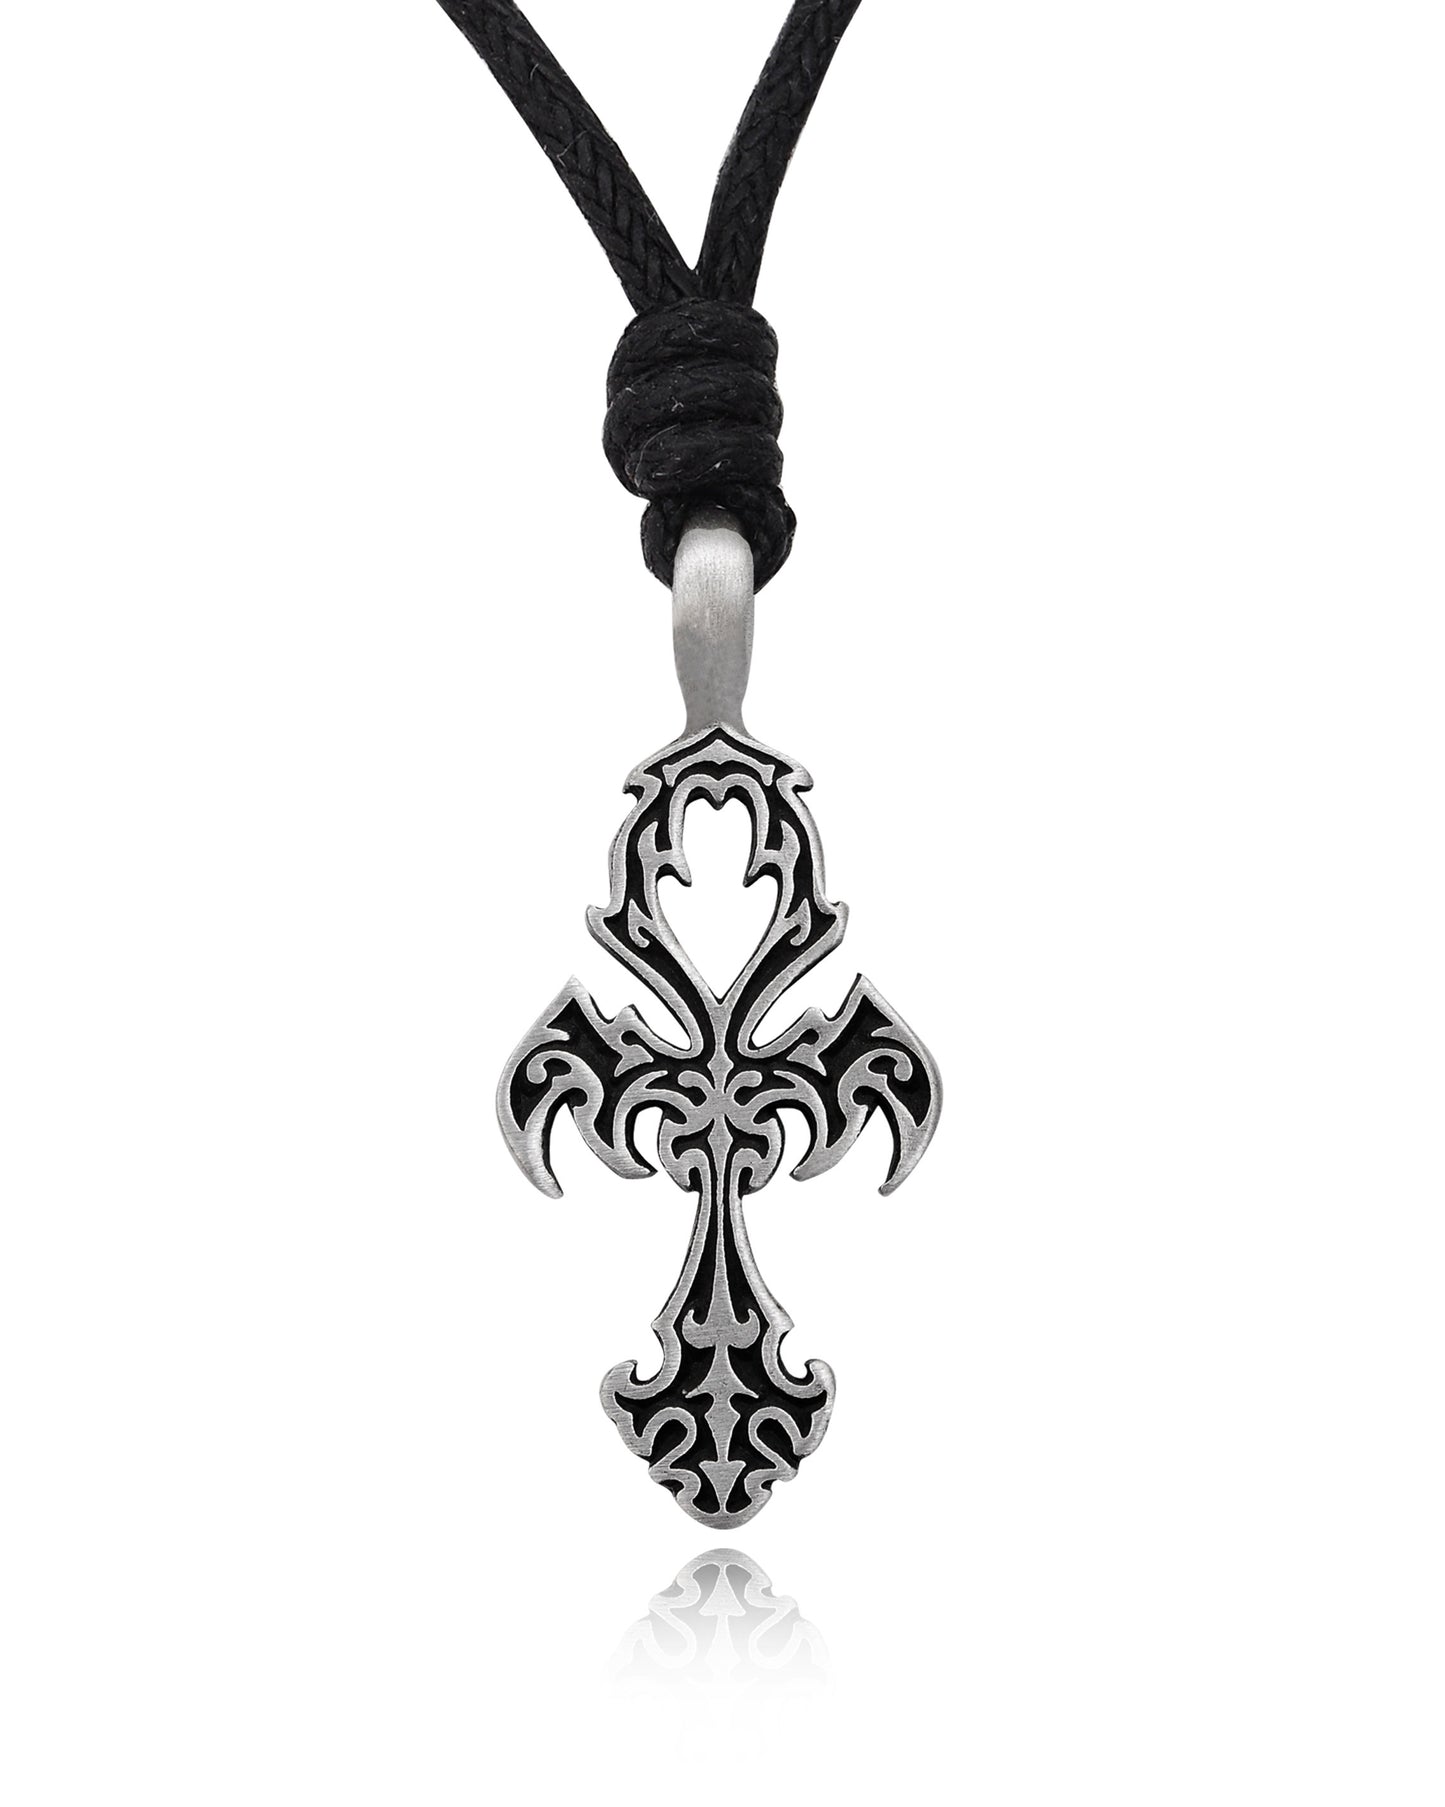 Classic Celtic Cross Silver Pewter Charm Necklace Pendant Jewelry